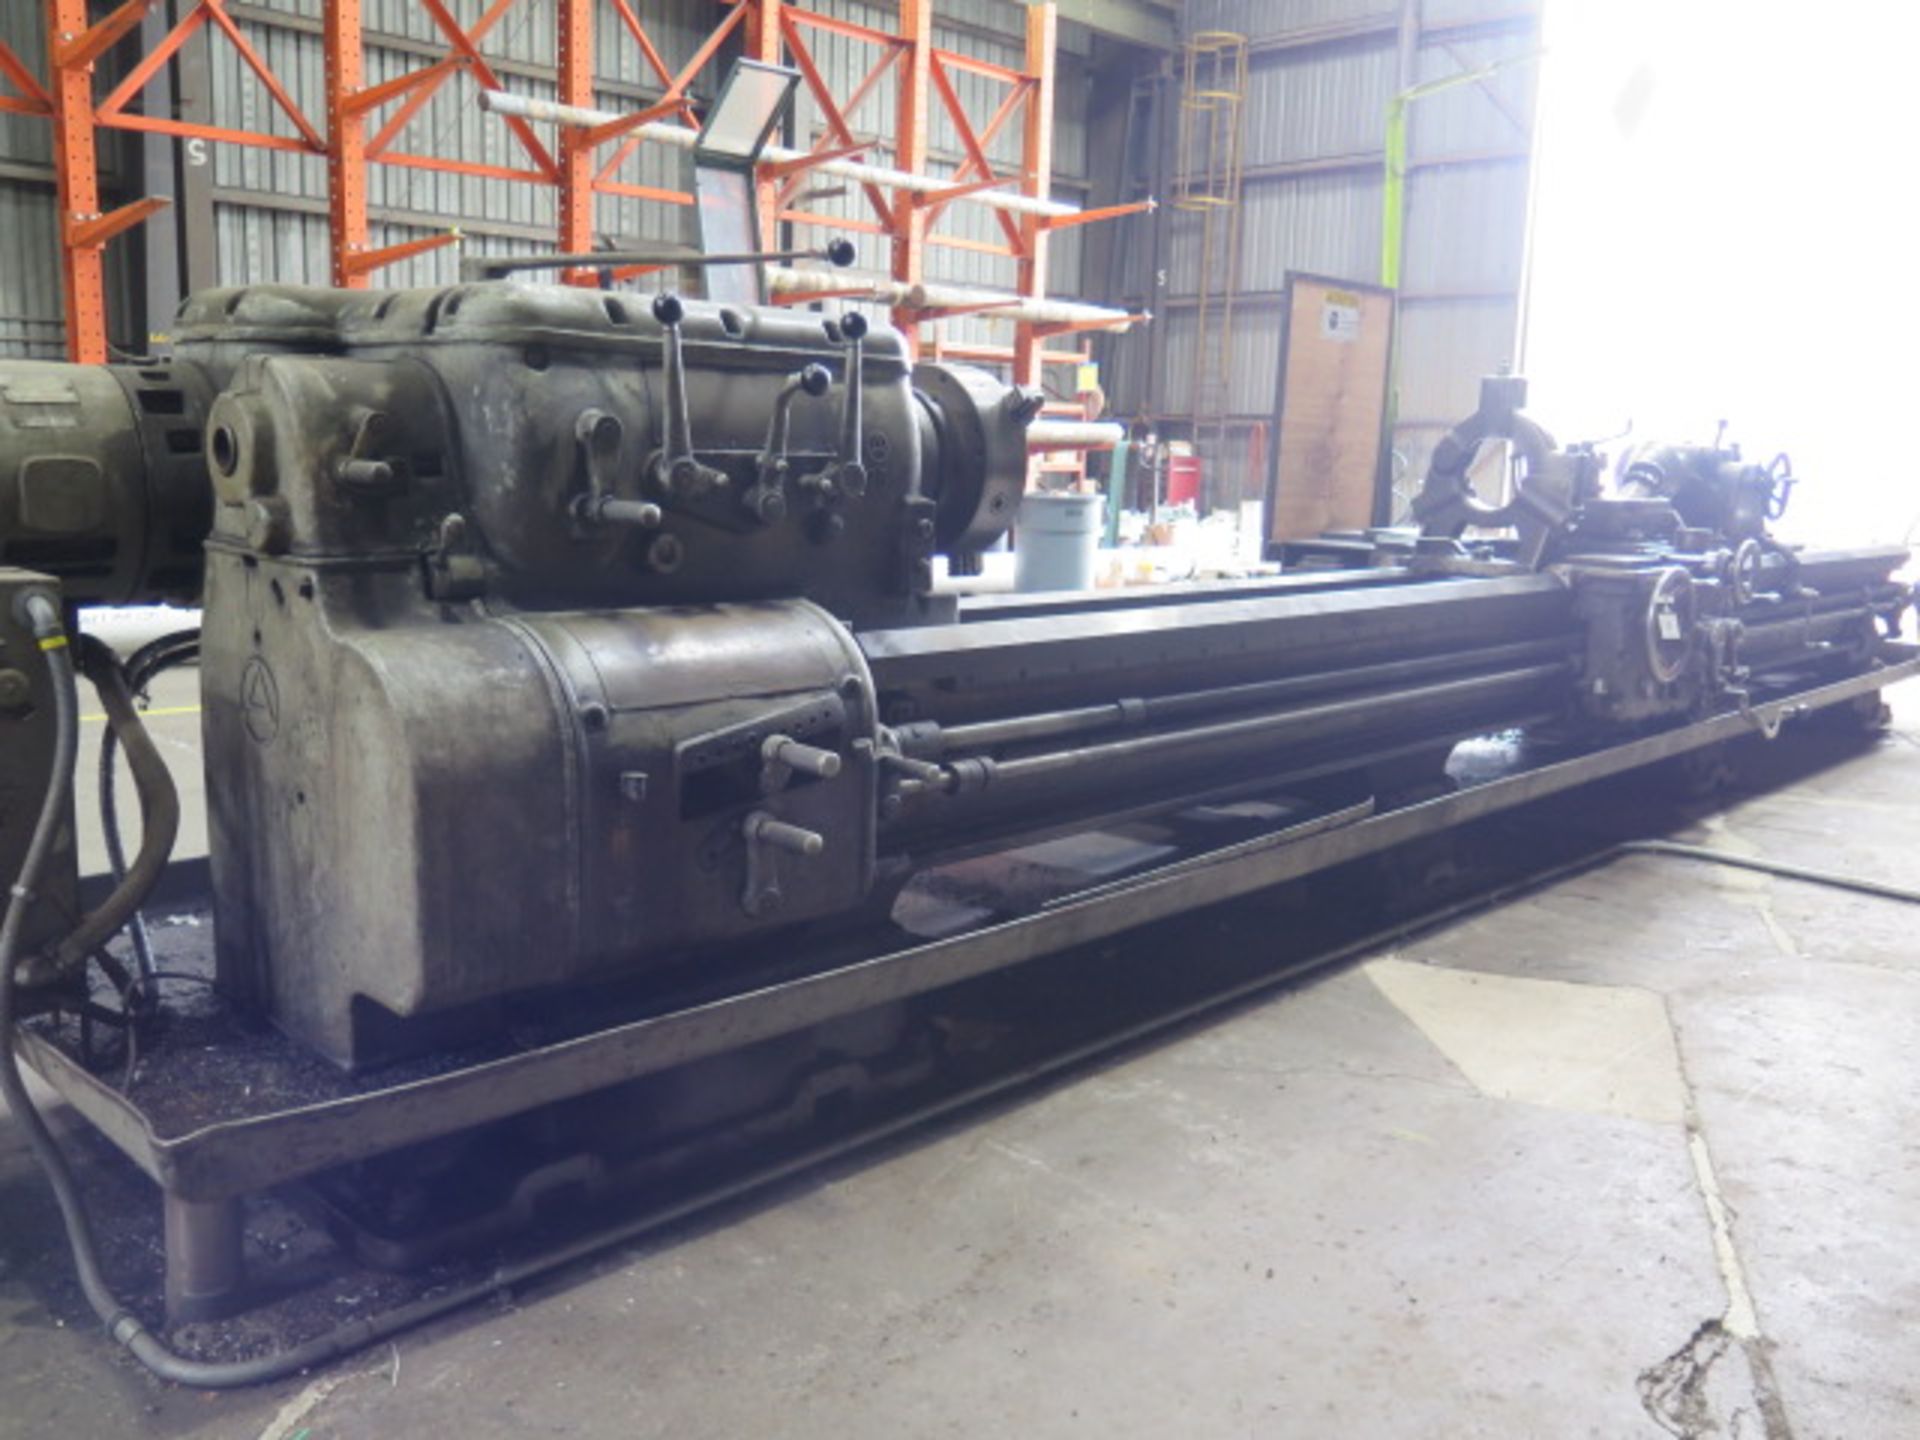 Axelson 25 28” x 216” Geared Head Lathe w/ 24’ Bed, 8-555 RPM,Taper Attachment, Tailstock,SOLD AS IS - Image 2 of 12